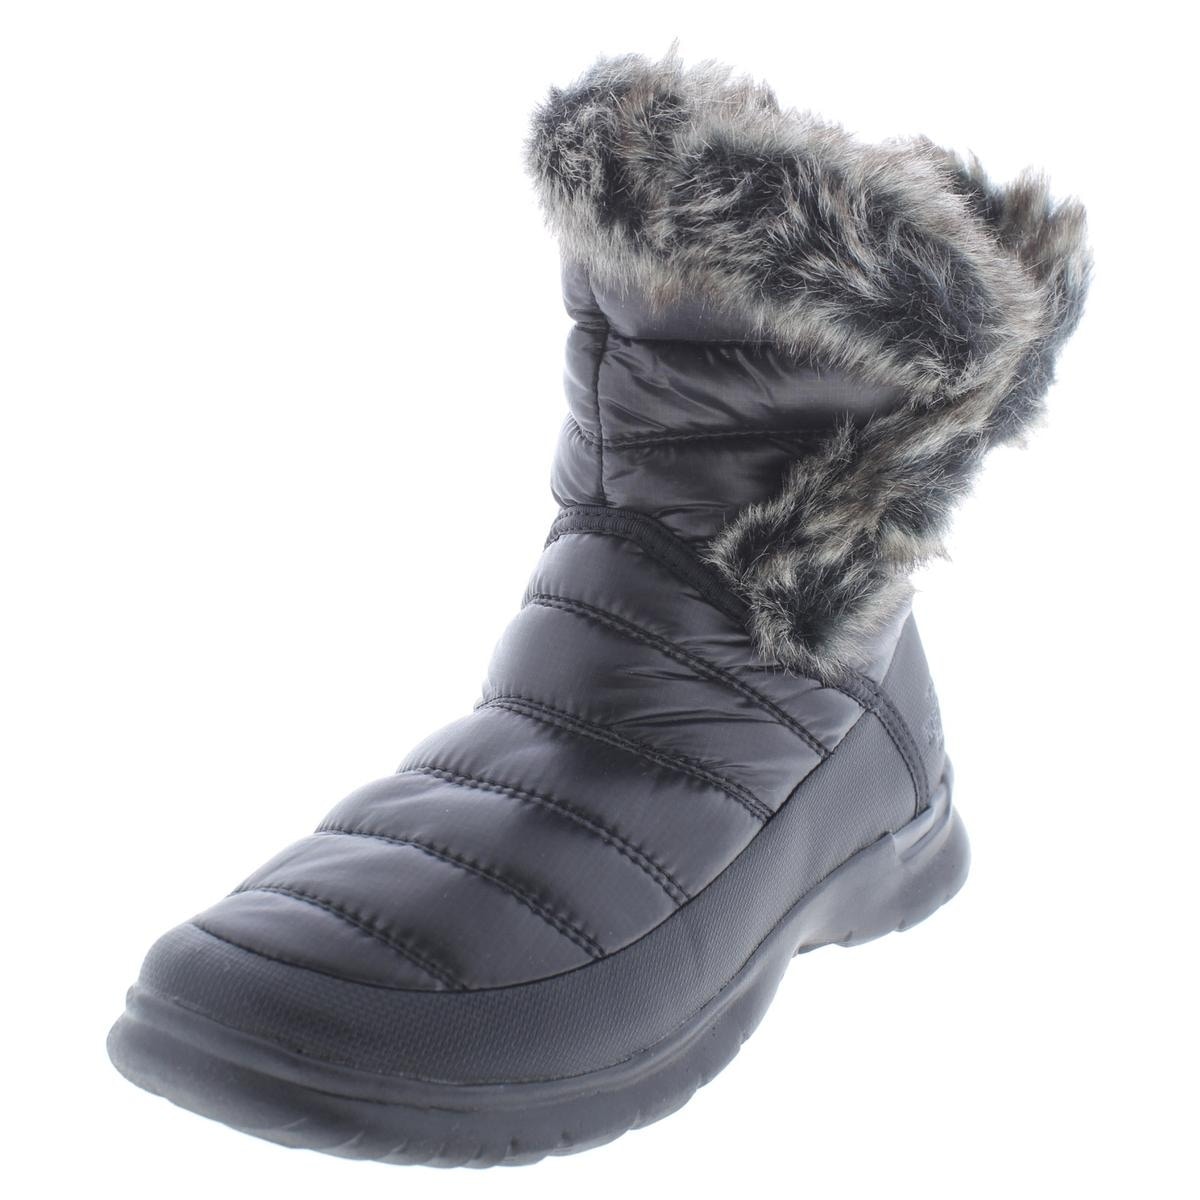 fur north face winter boots womens